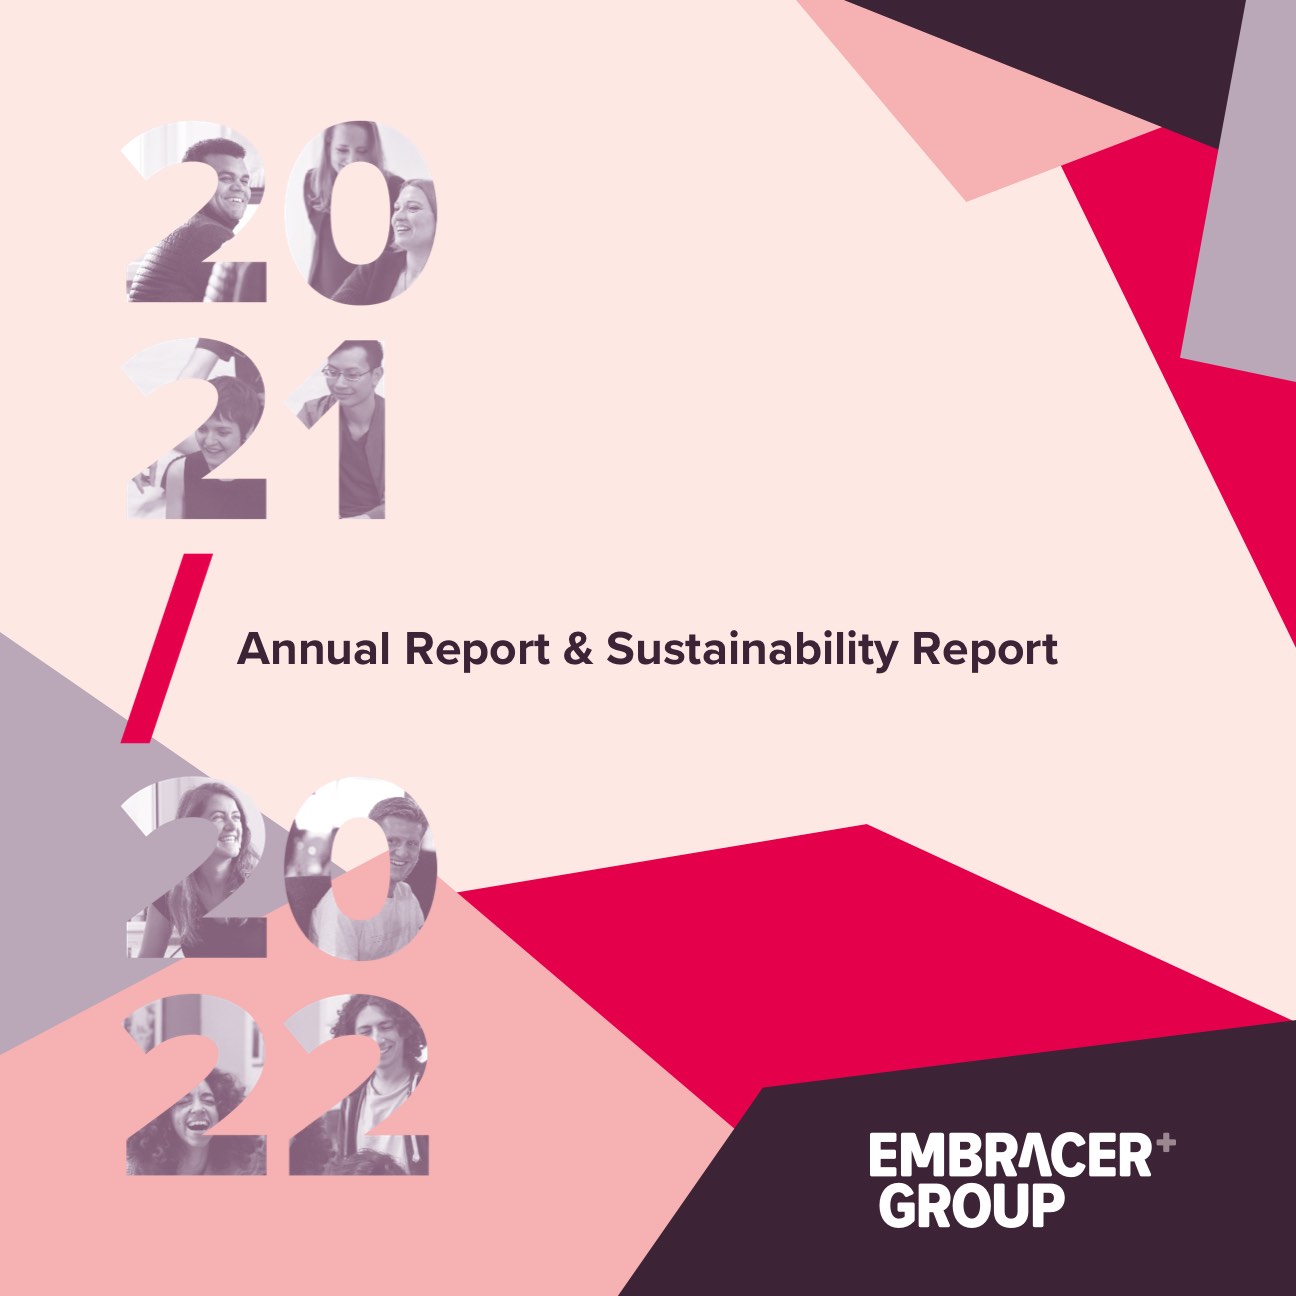 Annual Report & Sustainability Report